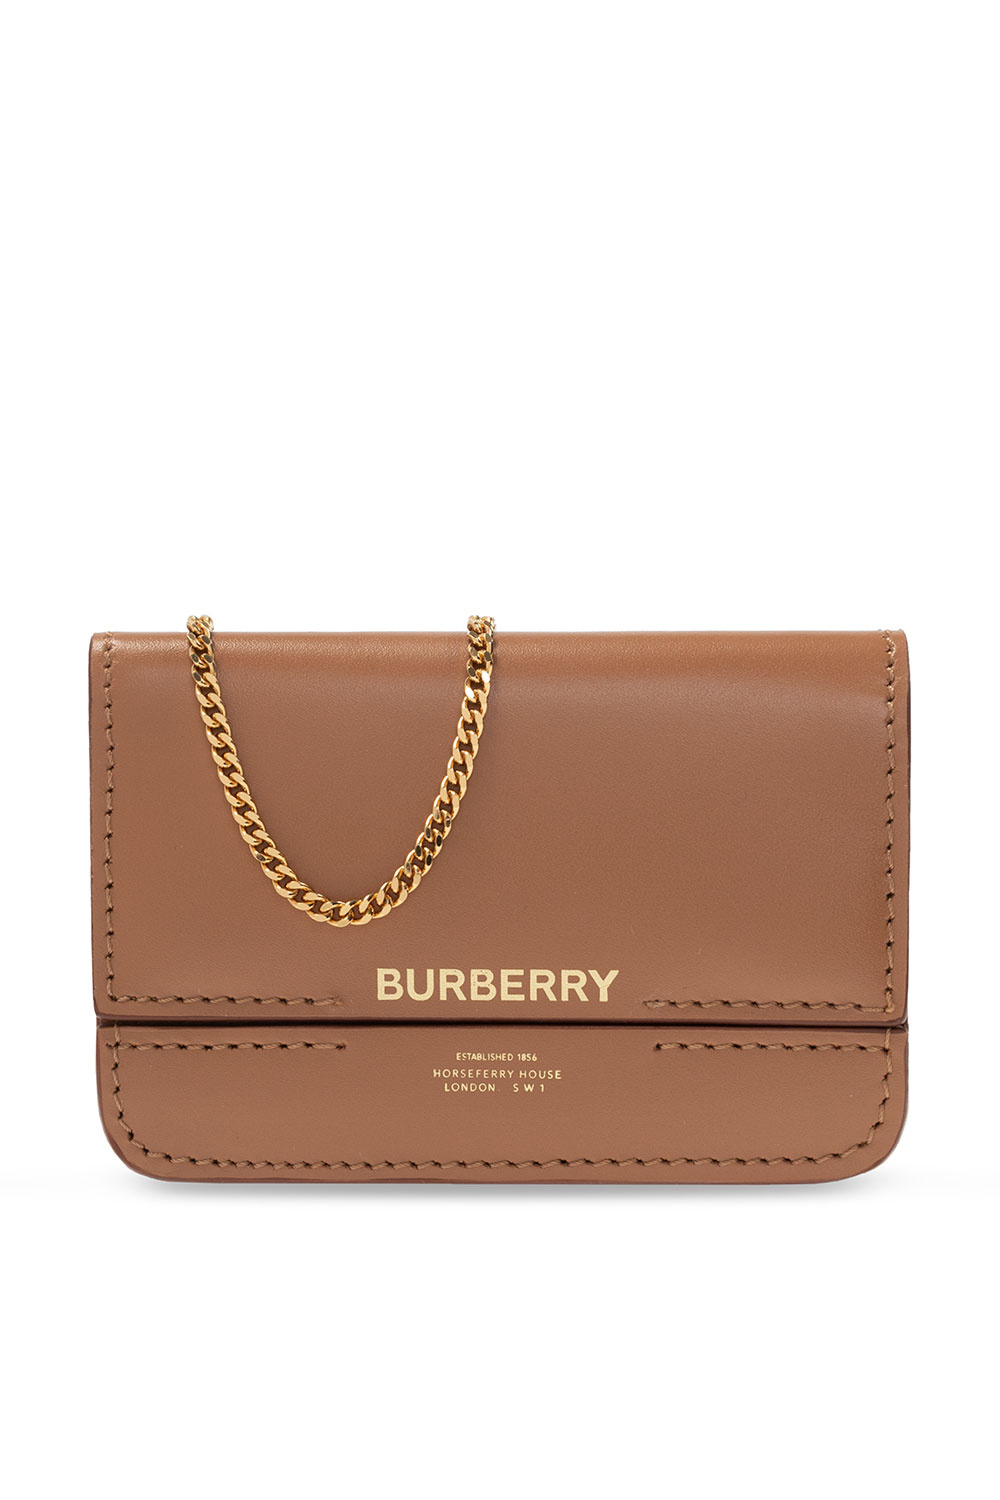 Burberry Card Case On Chain Cheap Sale, SAVE 36% 